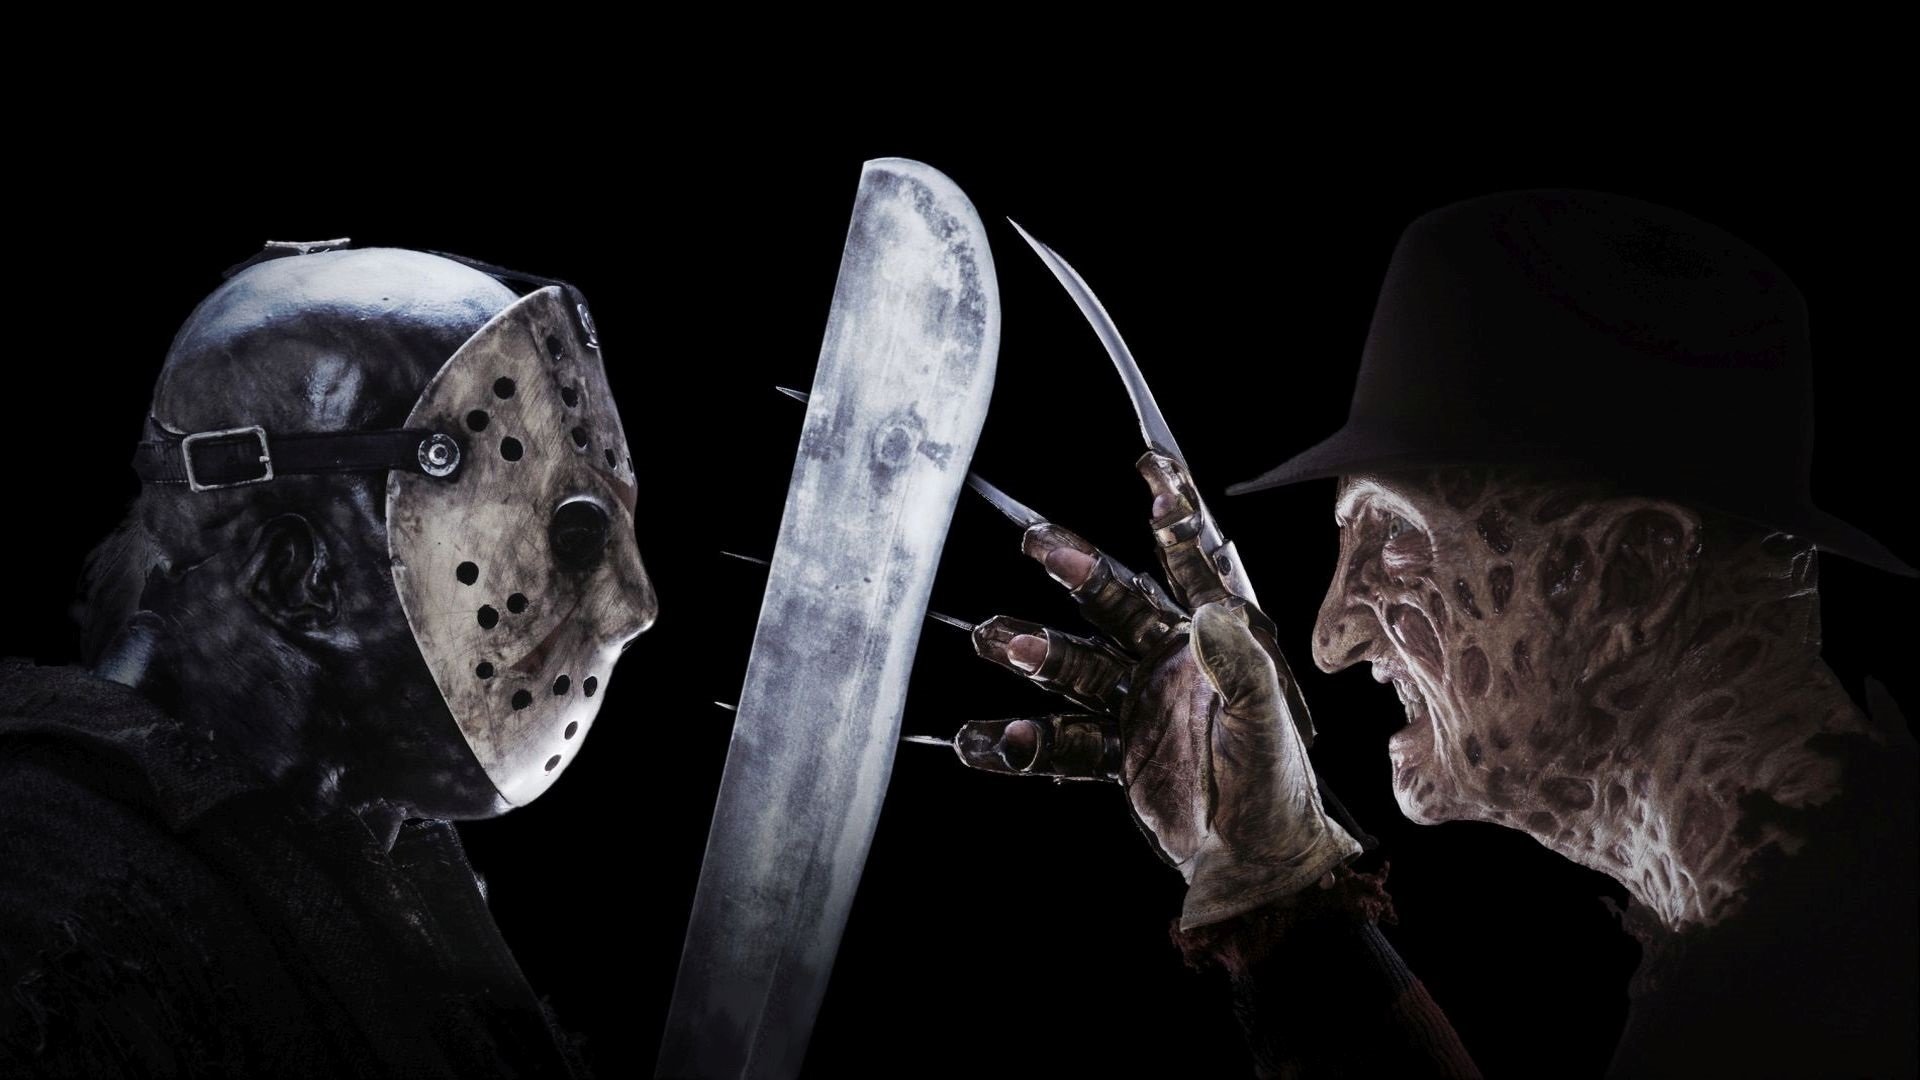 Freddy Kruger and Jason Vorhess look at each other